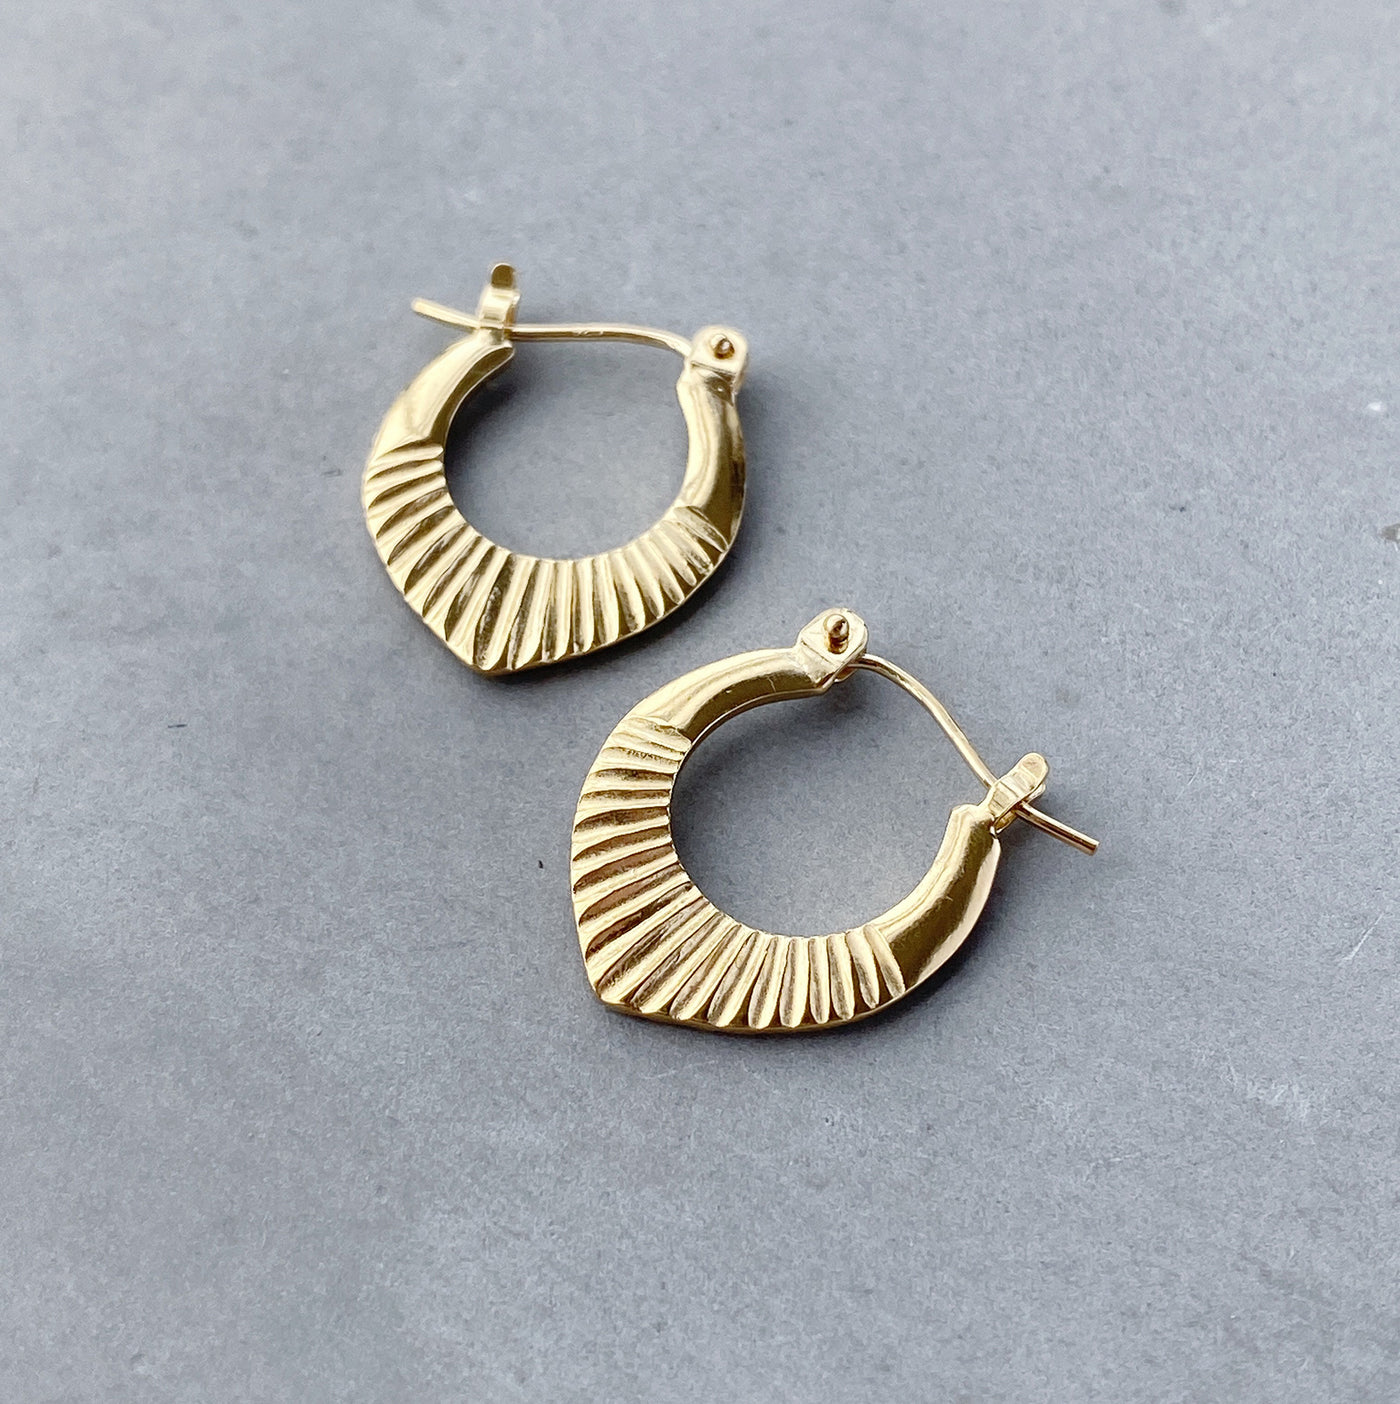 Gold Vermeil Small Oblong hoops with hinge closure and sunburst bottom by Corey Egan